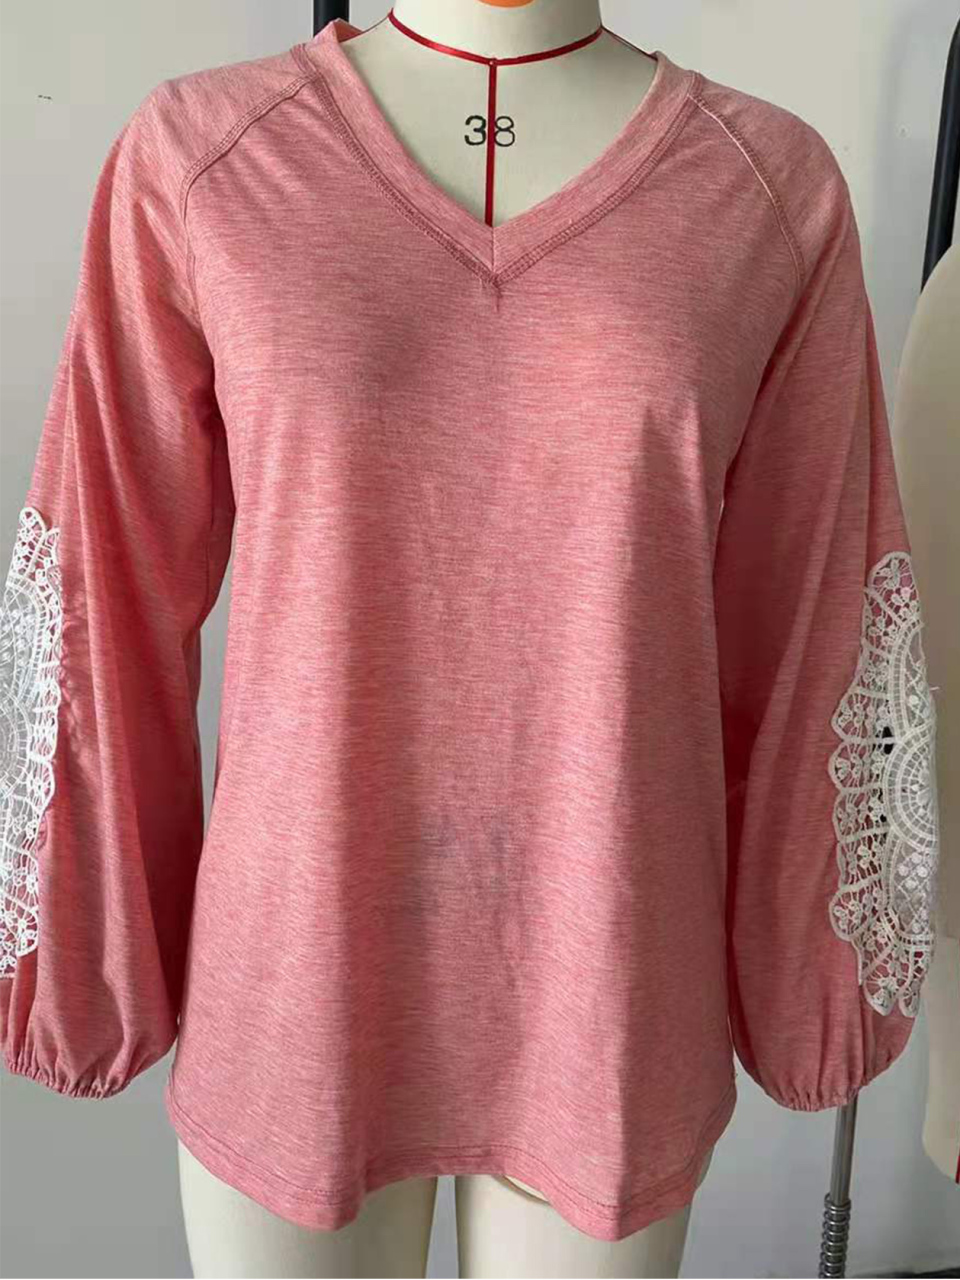 Women's Fashion Casual V Neck Lace Top